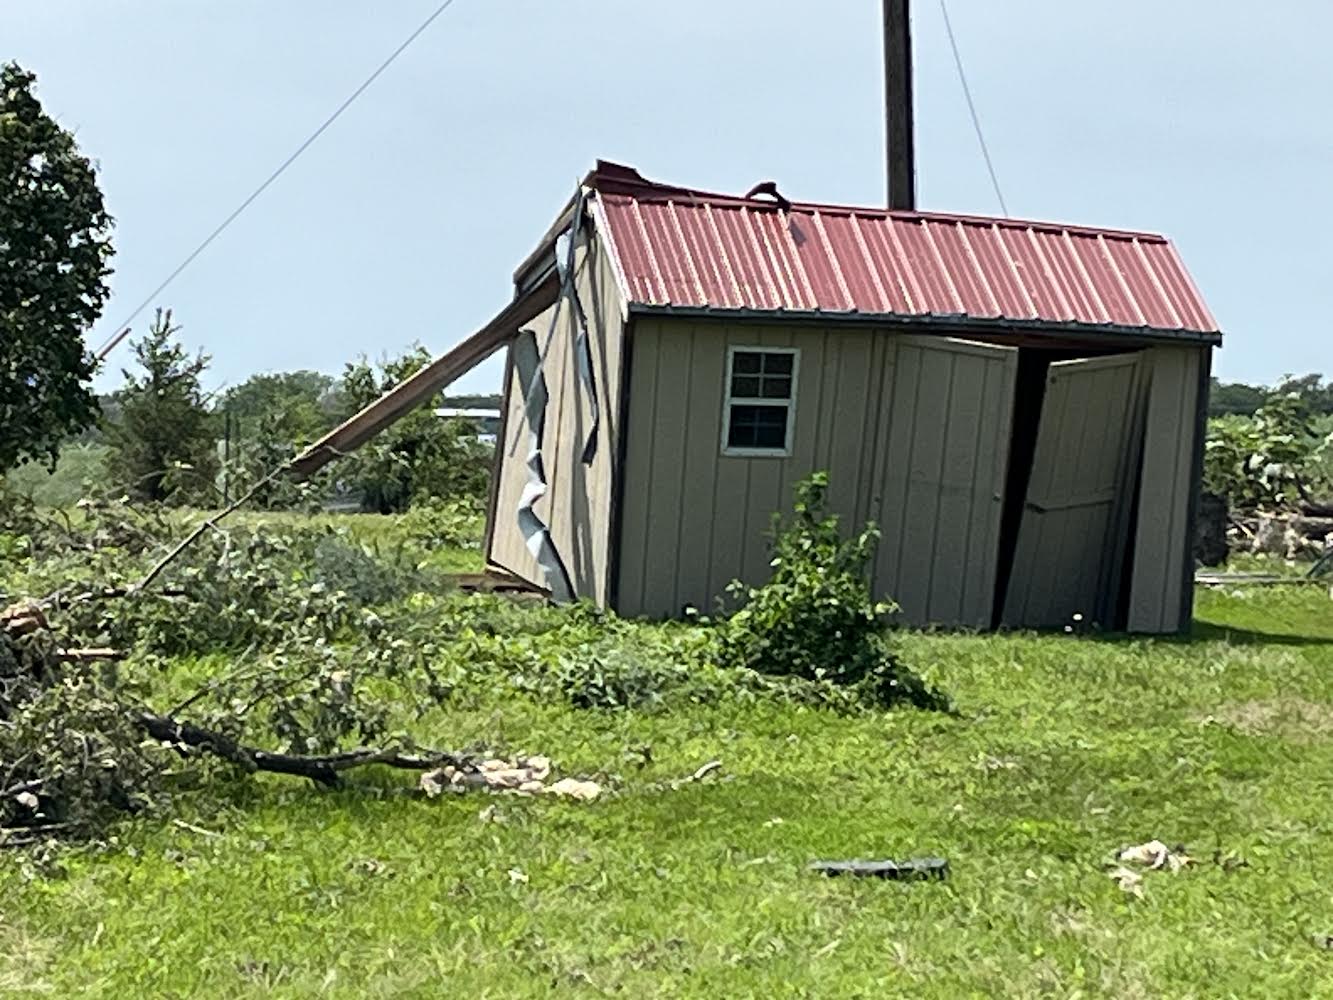 NWS Confirms Tornado hit Martell on Saturday